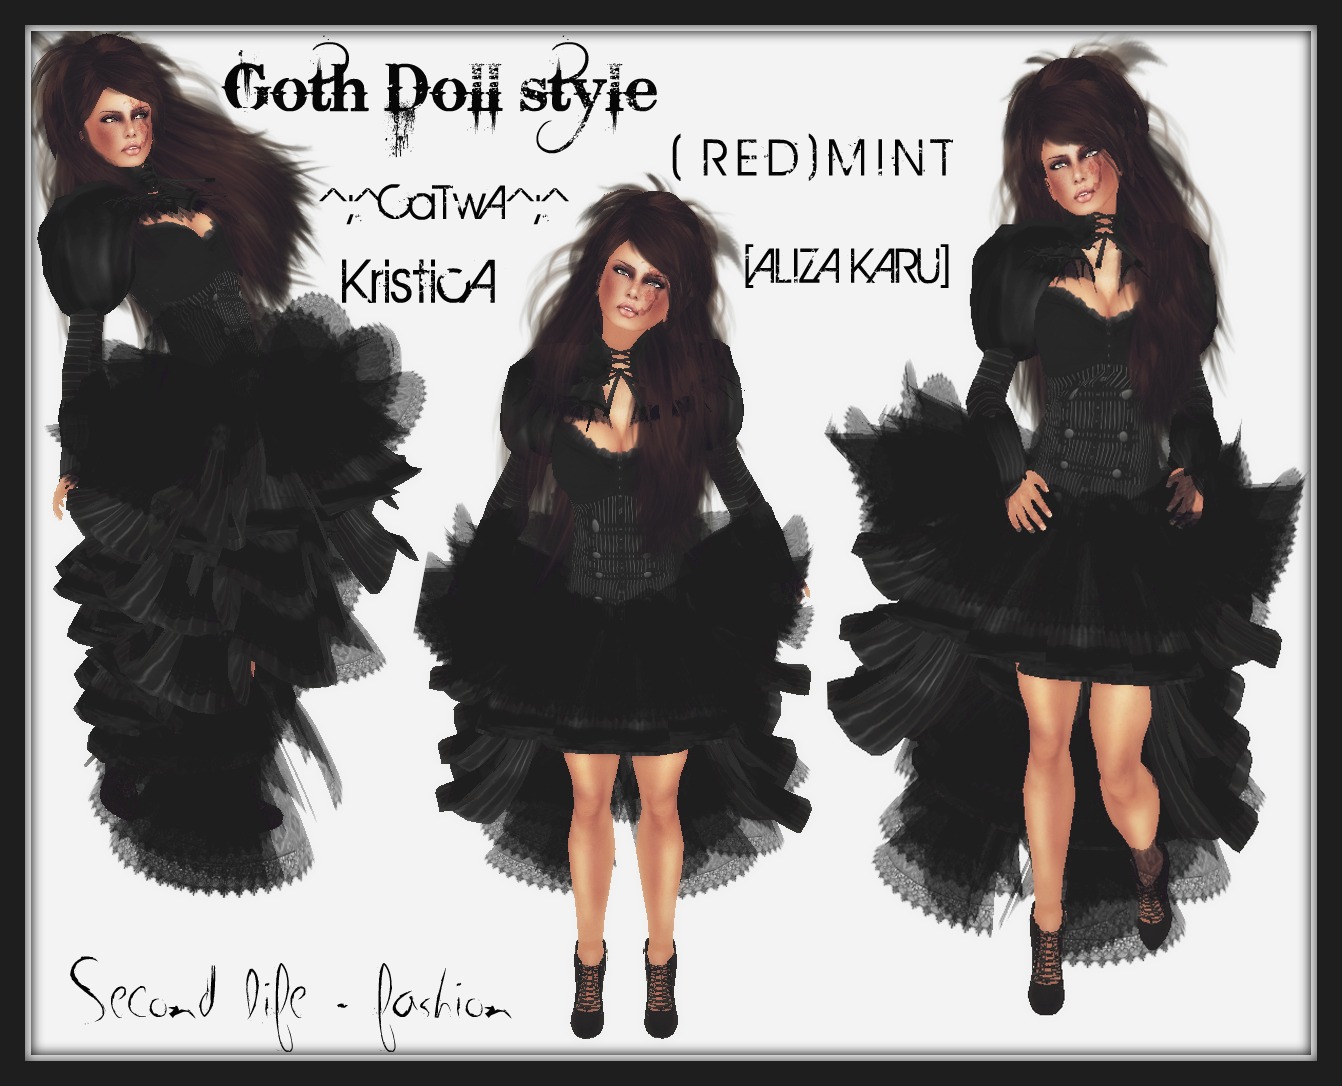 Second Life - Fashion: The Goth doll Style